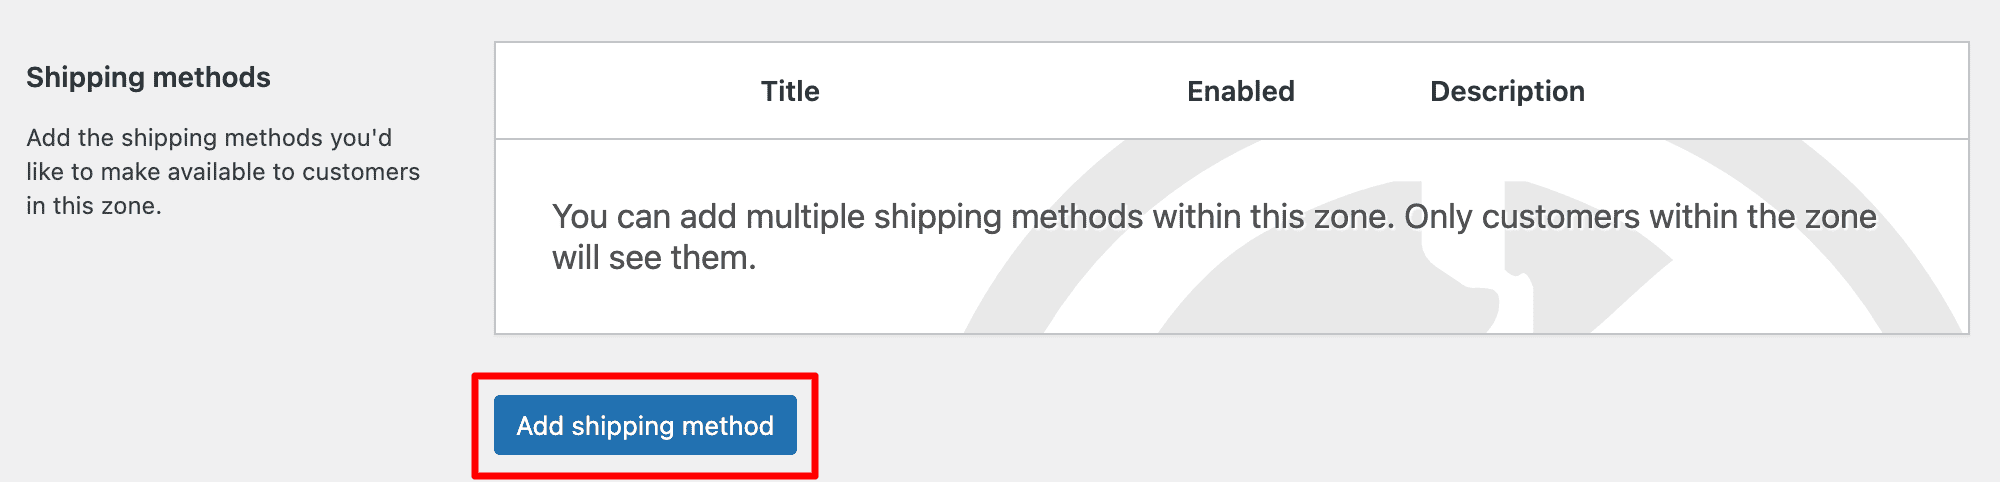 WooCommerce Local Pickup: Add Shipping Method